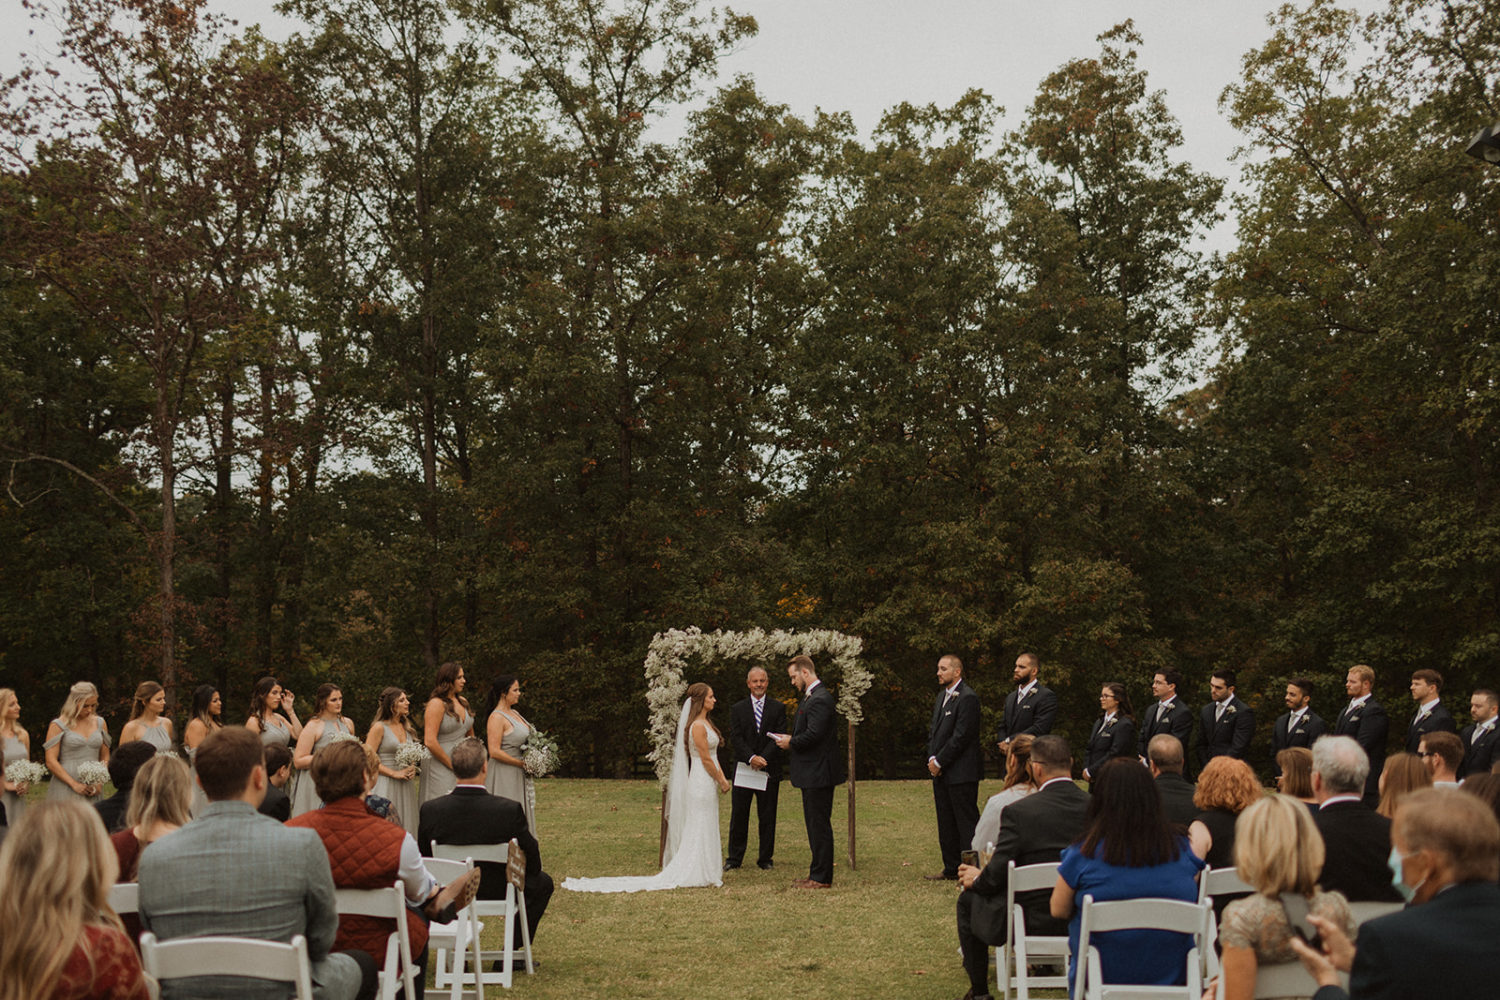 Couple stands in backyard wedding ceremony